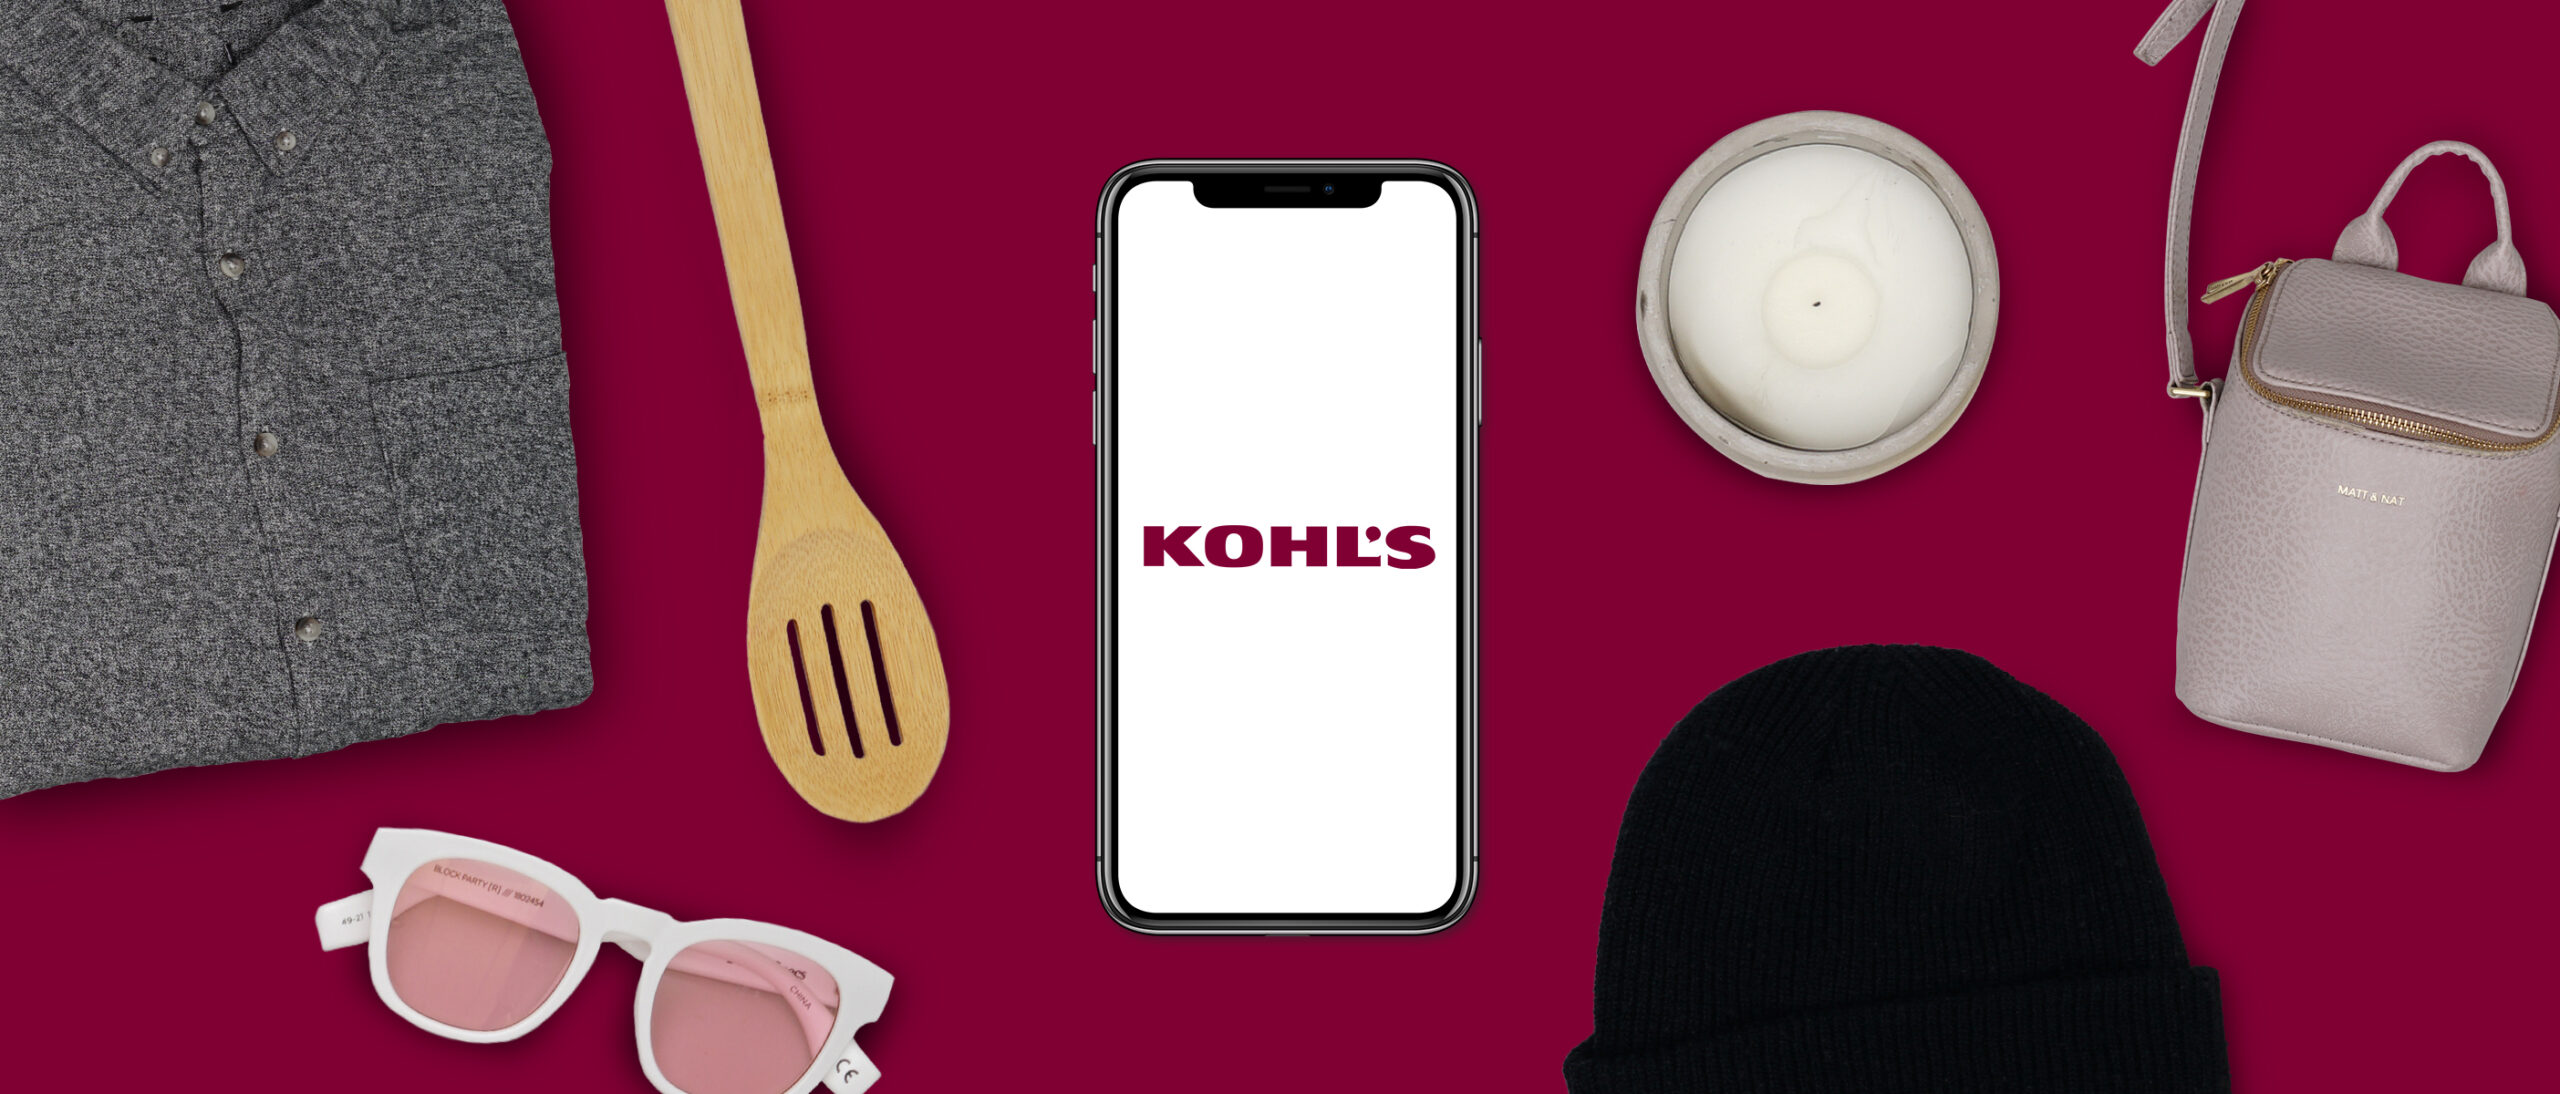 Does Kohl’s Price Match? Everything You Need To Know